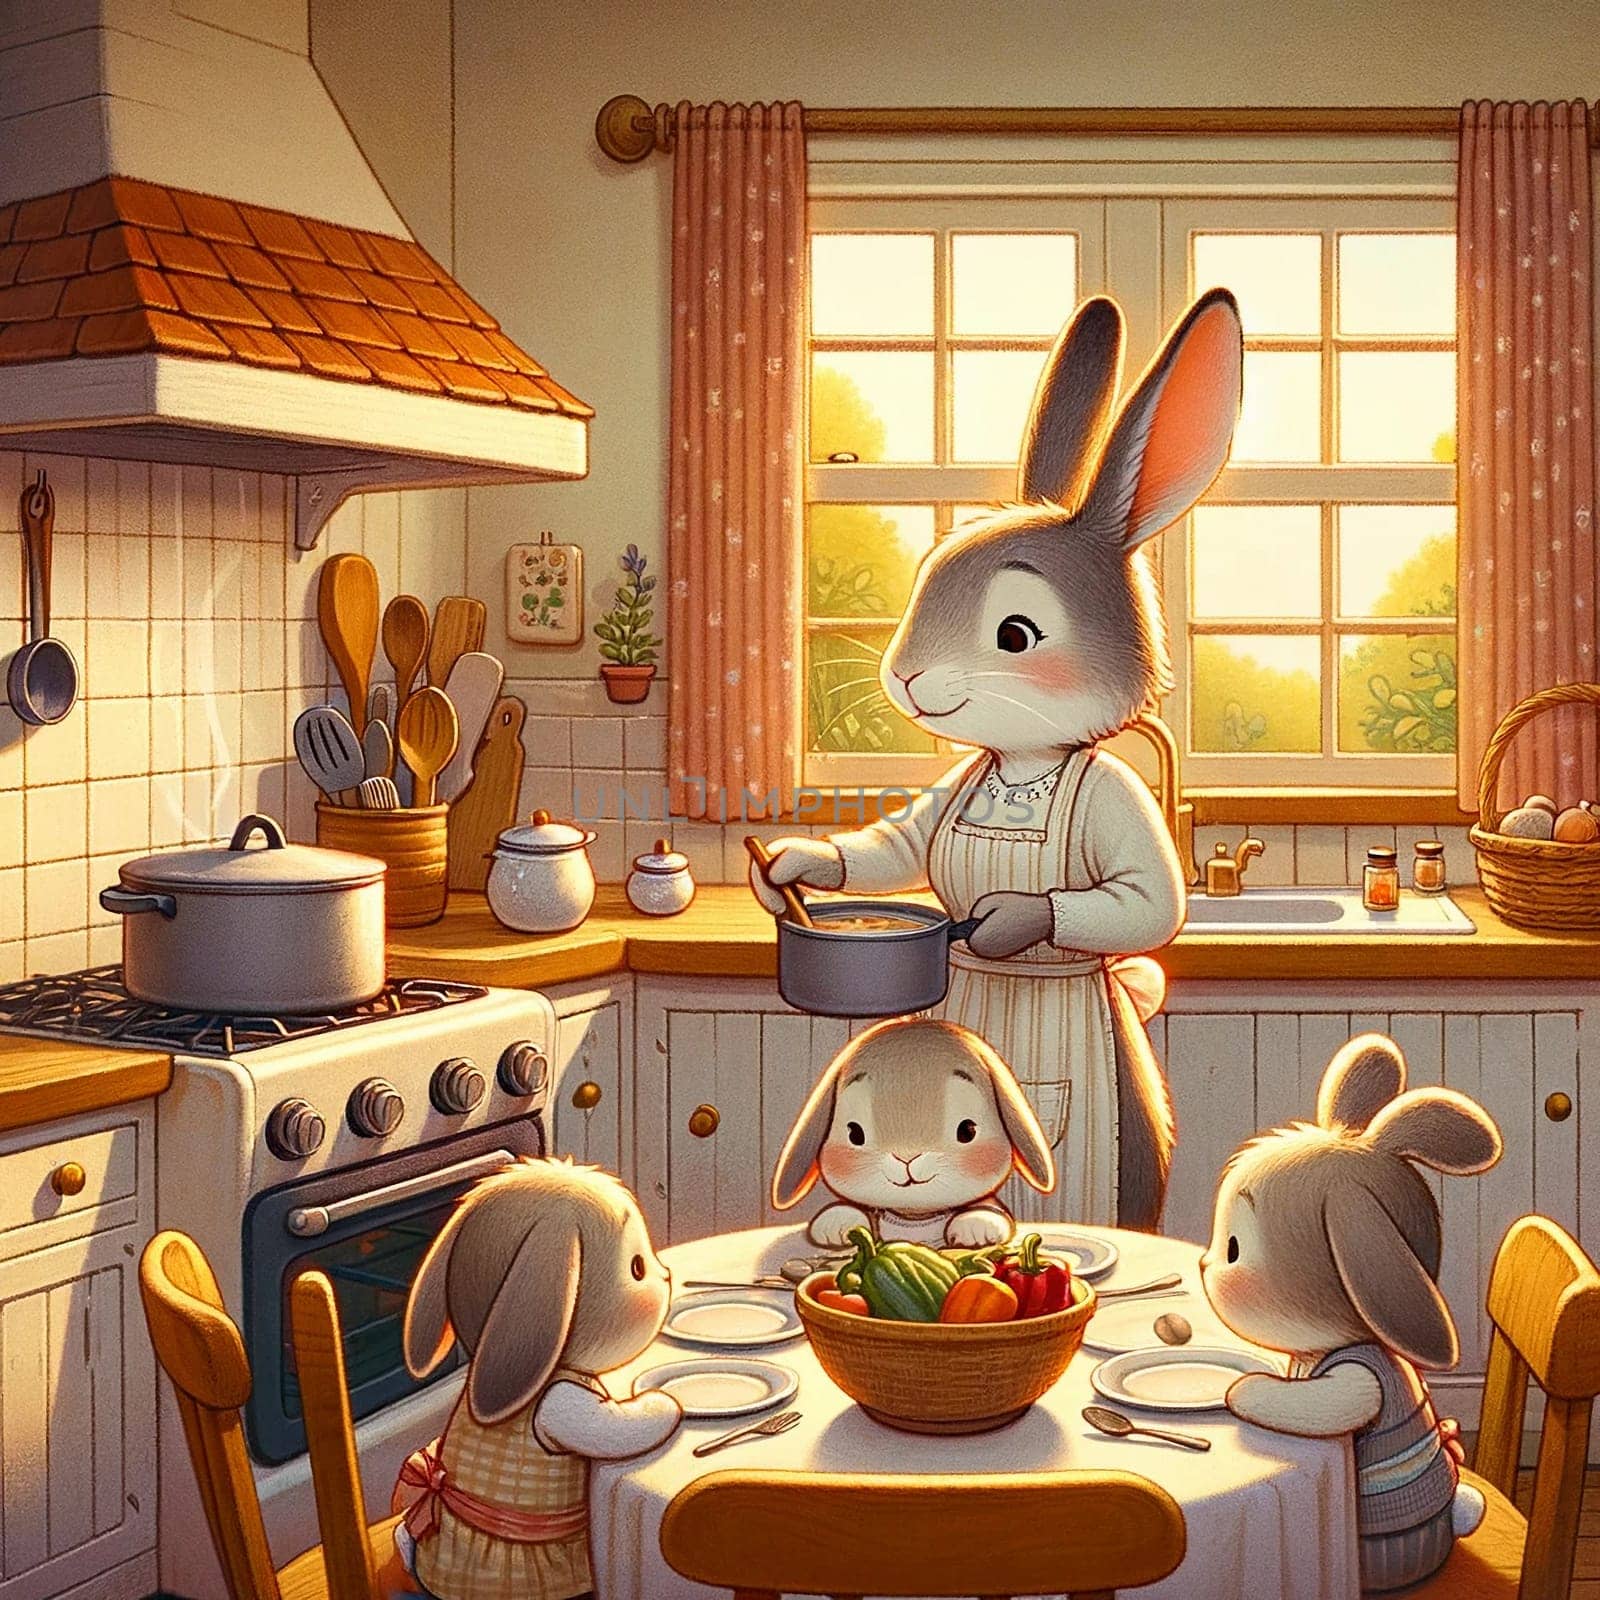 A mother rabbit wearing an apron stands at the stove, stirring a meal for her four children in a cozy kitchen.